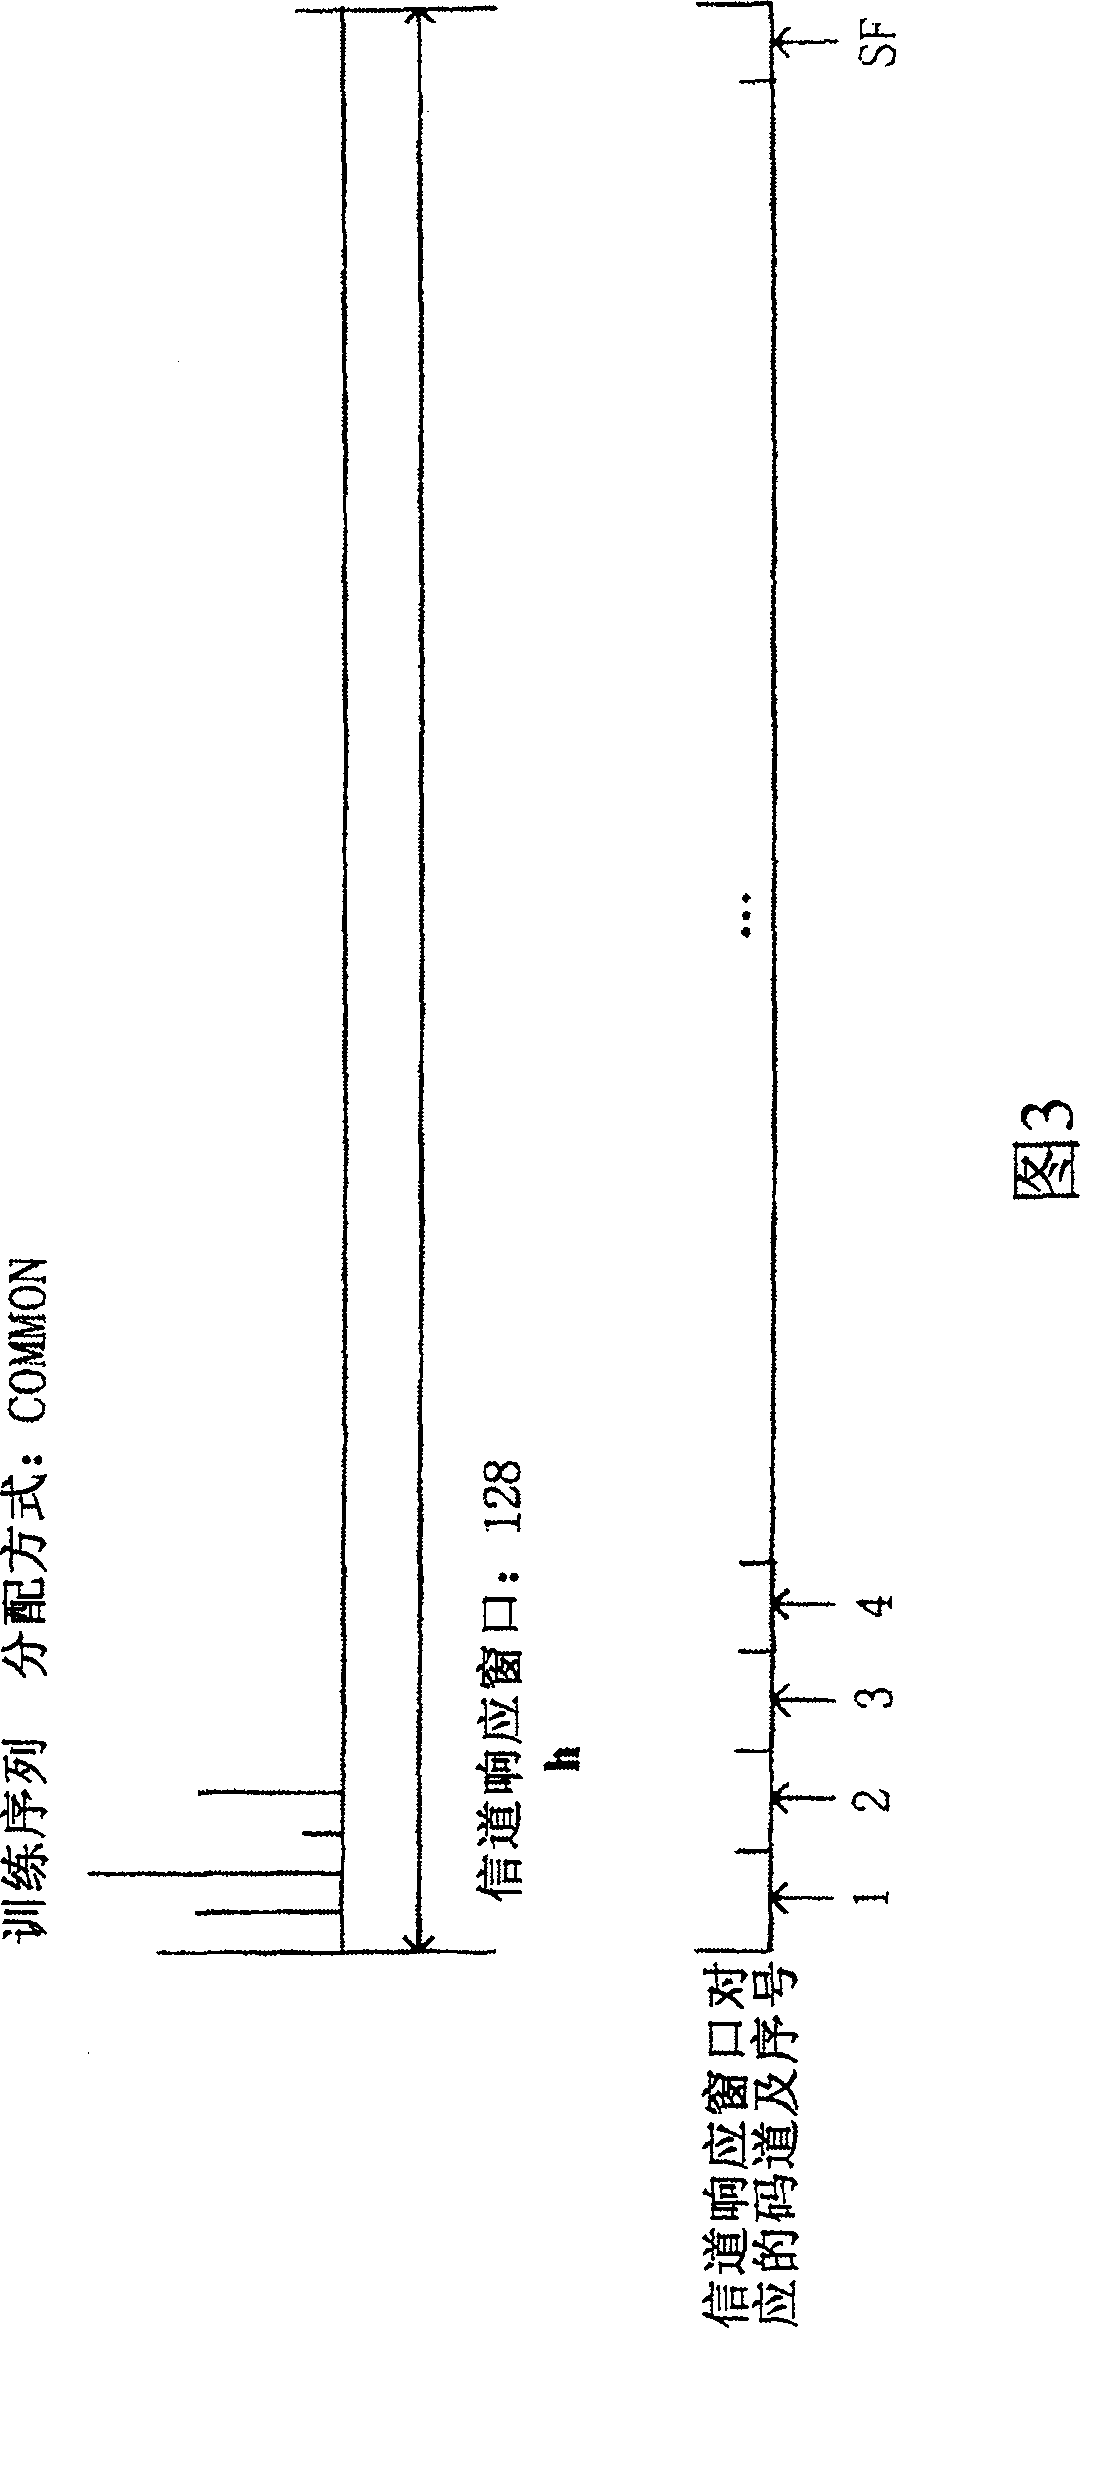 Mobile terminal, joint receiver, activated code channel information detection and allocating device and its method